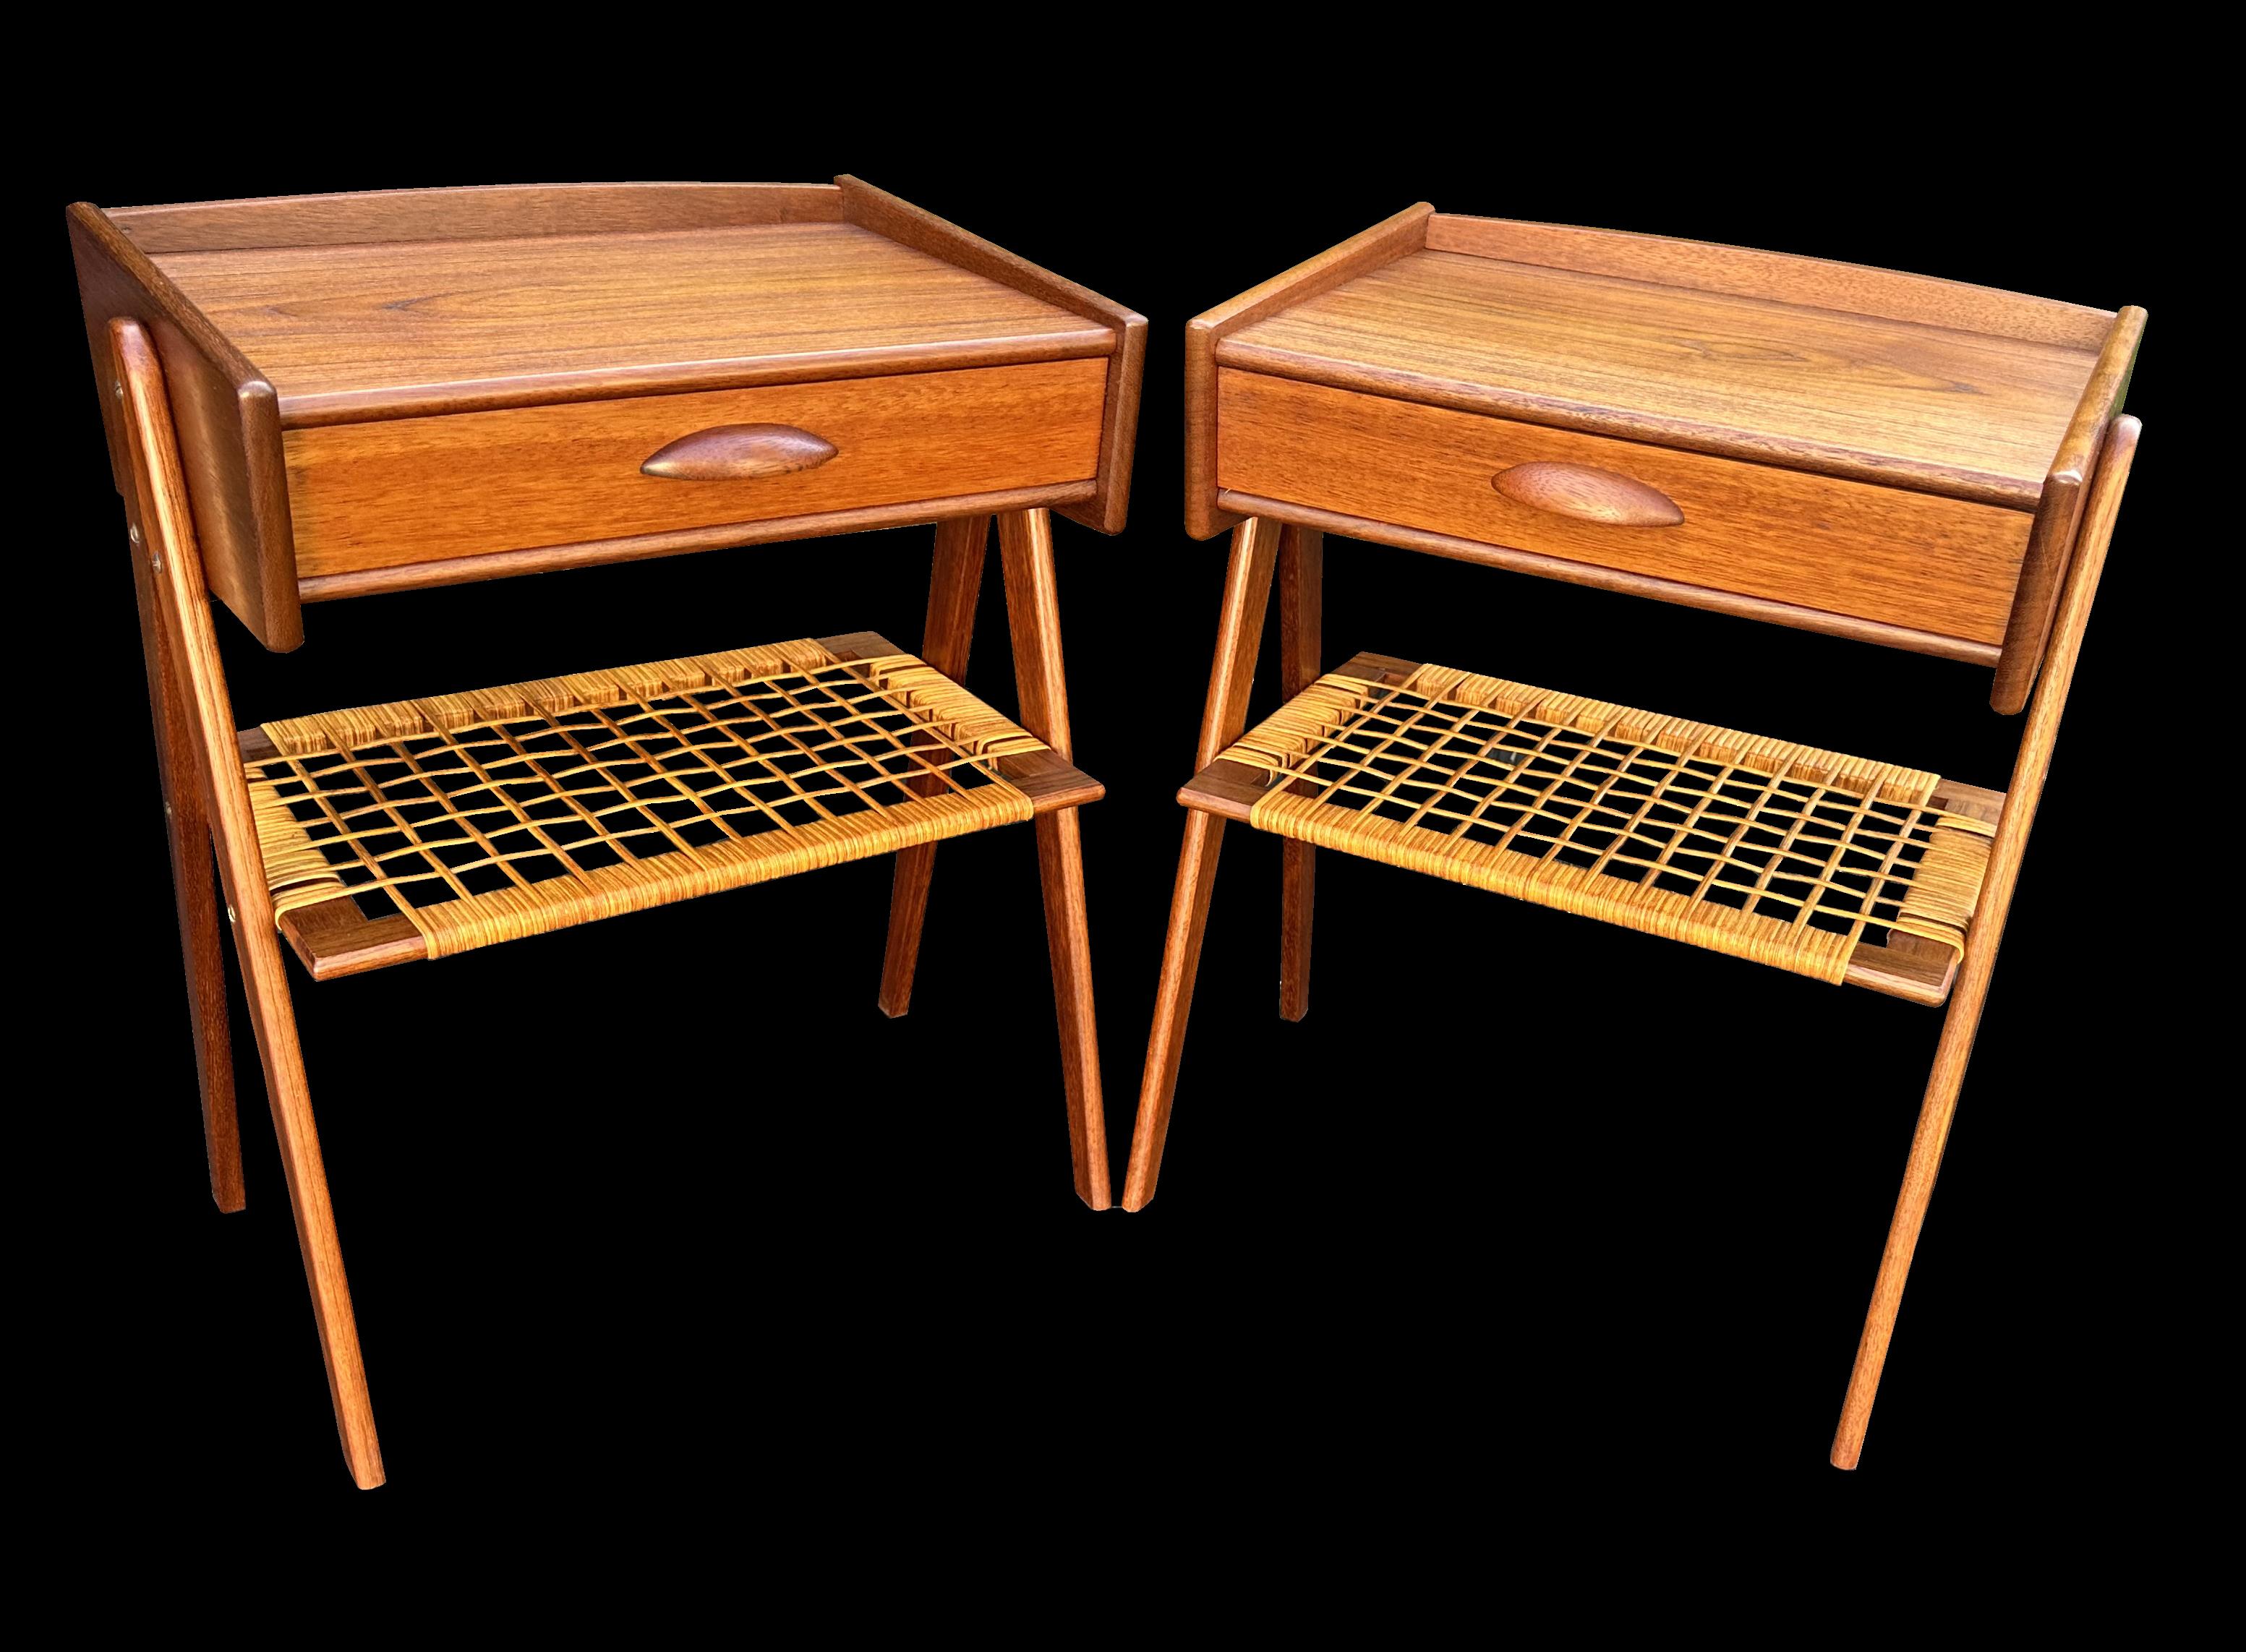 We have 2 pairs of these beautiful bedside tables, both made of Teak with a single drawer and a Rattan undertier.
Both are the same colour and patina, the only difference between one pair and the other is the grain on the tops,each pair match with